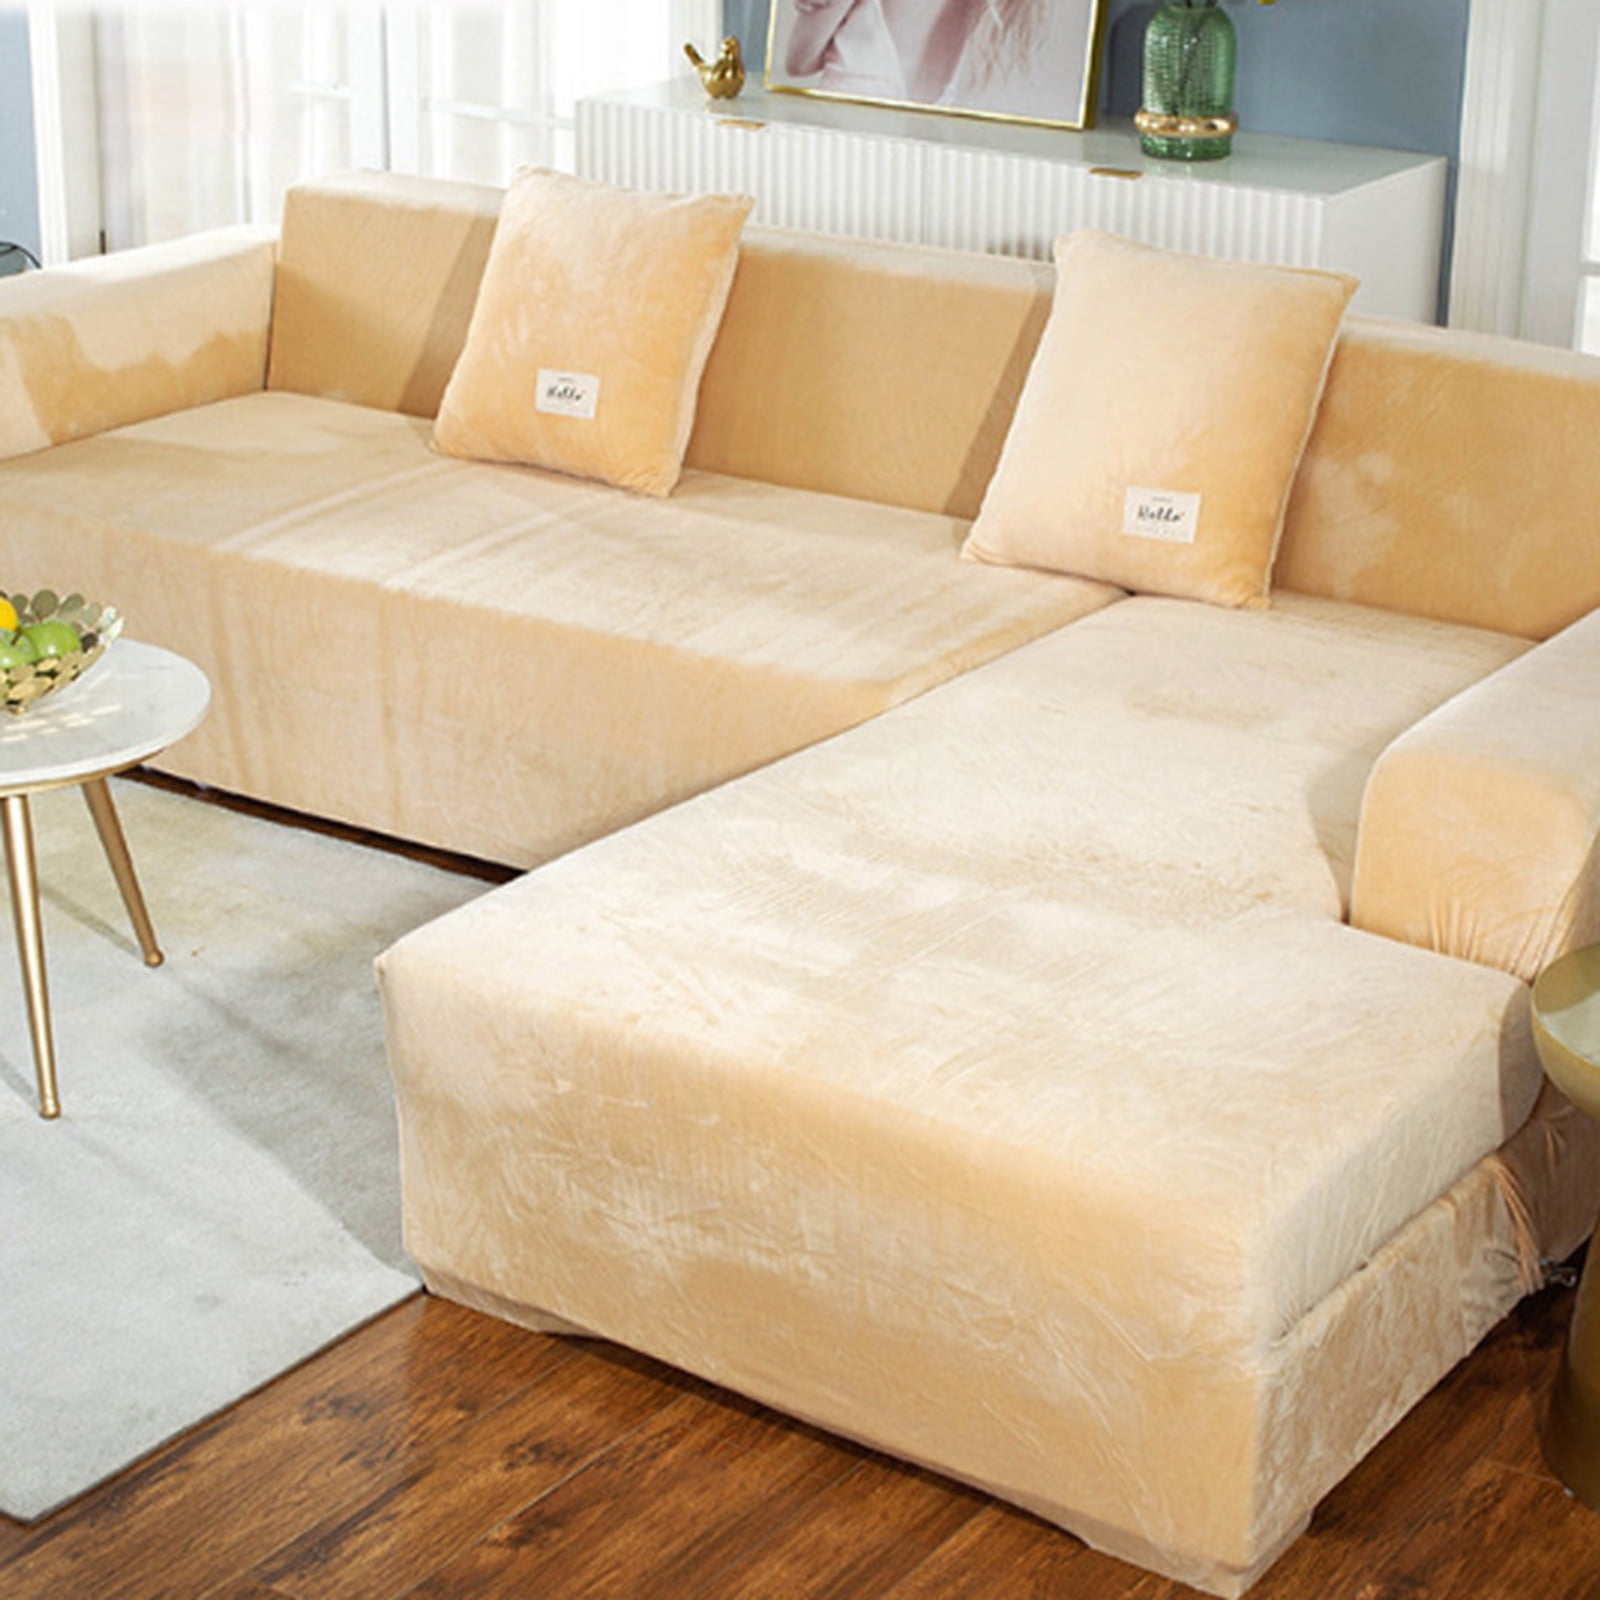 Details about   1/2/3/4 Seater Velvet Sofa Covers Slipcover Stretch Settee Couch Seat Protector 